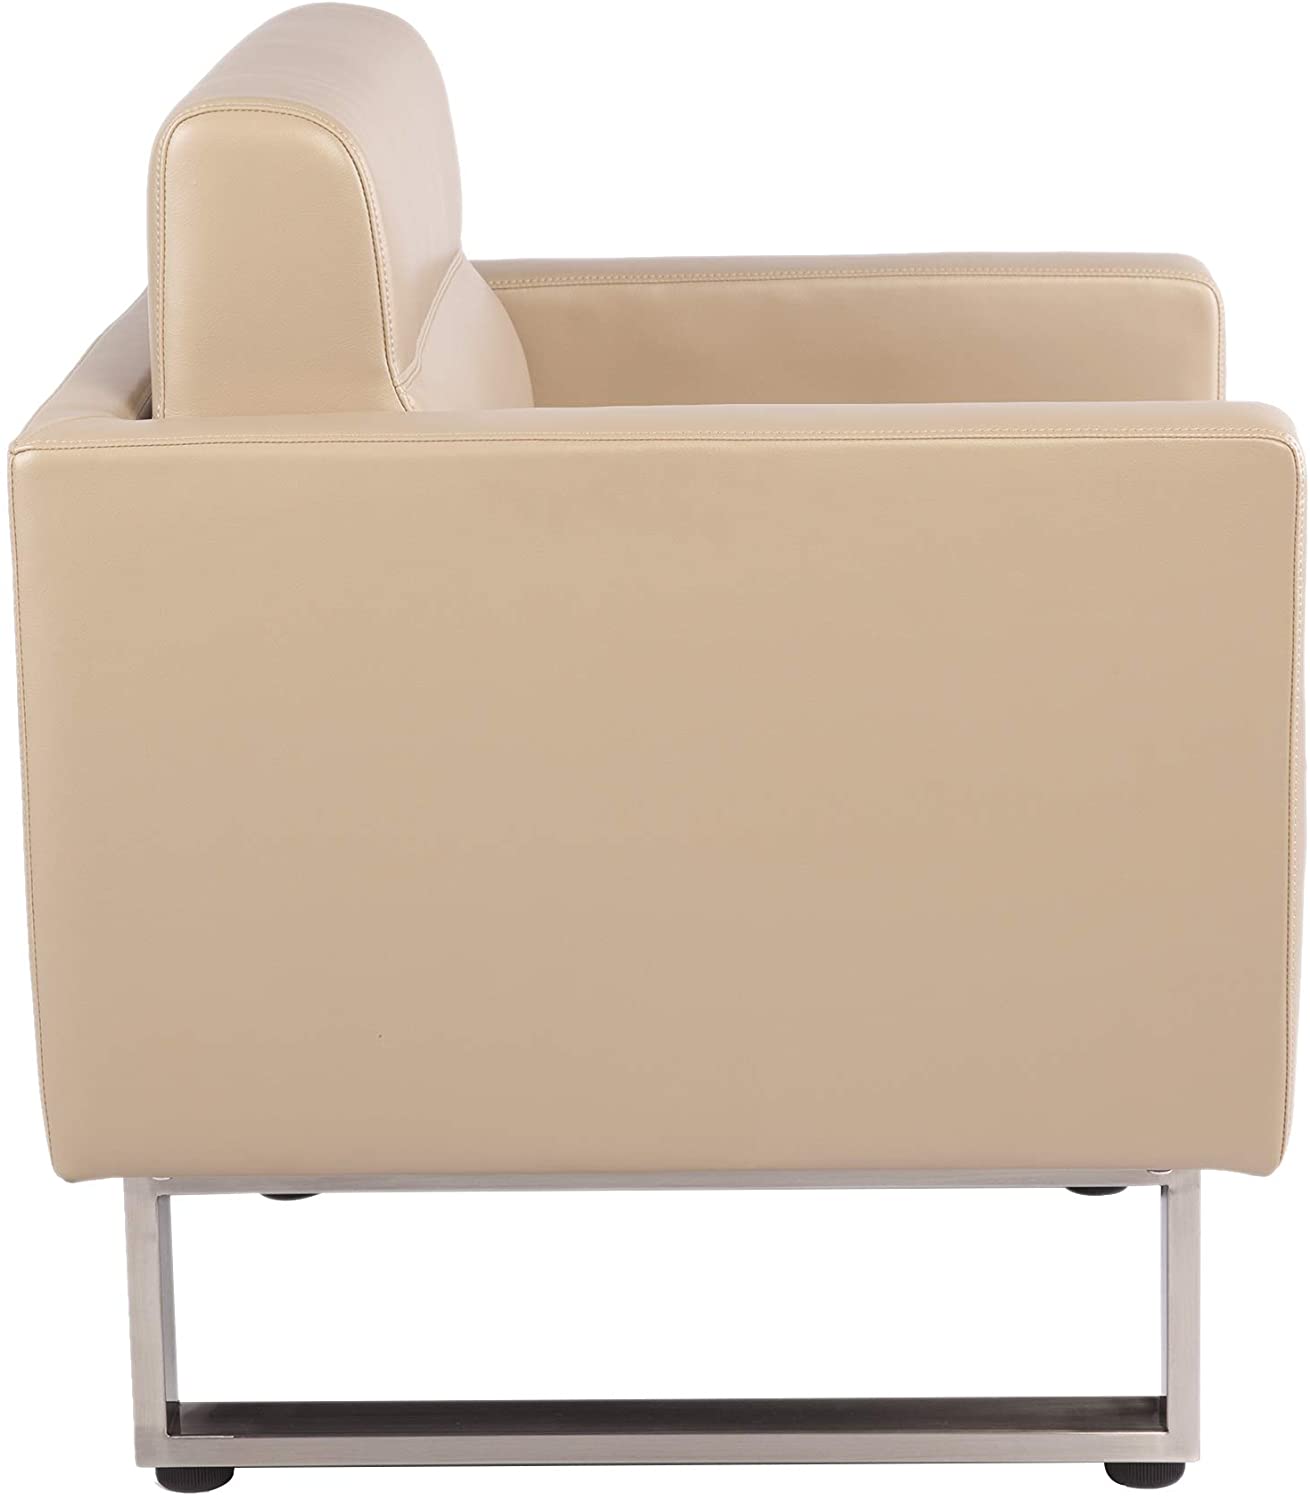 LUCKYERMORE Guest Chair Office Reception Chair Leather Sofa Chairs with PU Leather Soft Sponge, Beige